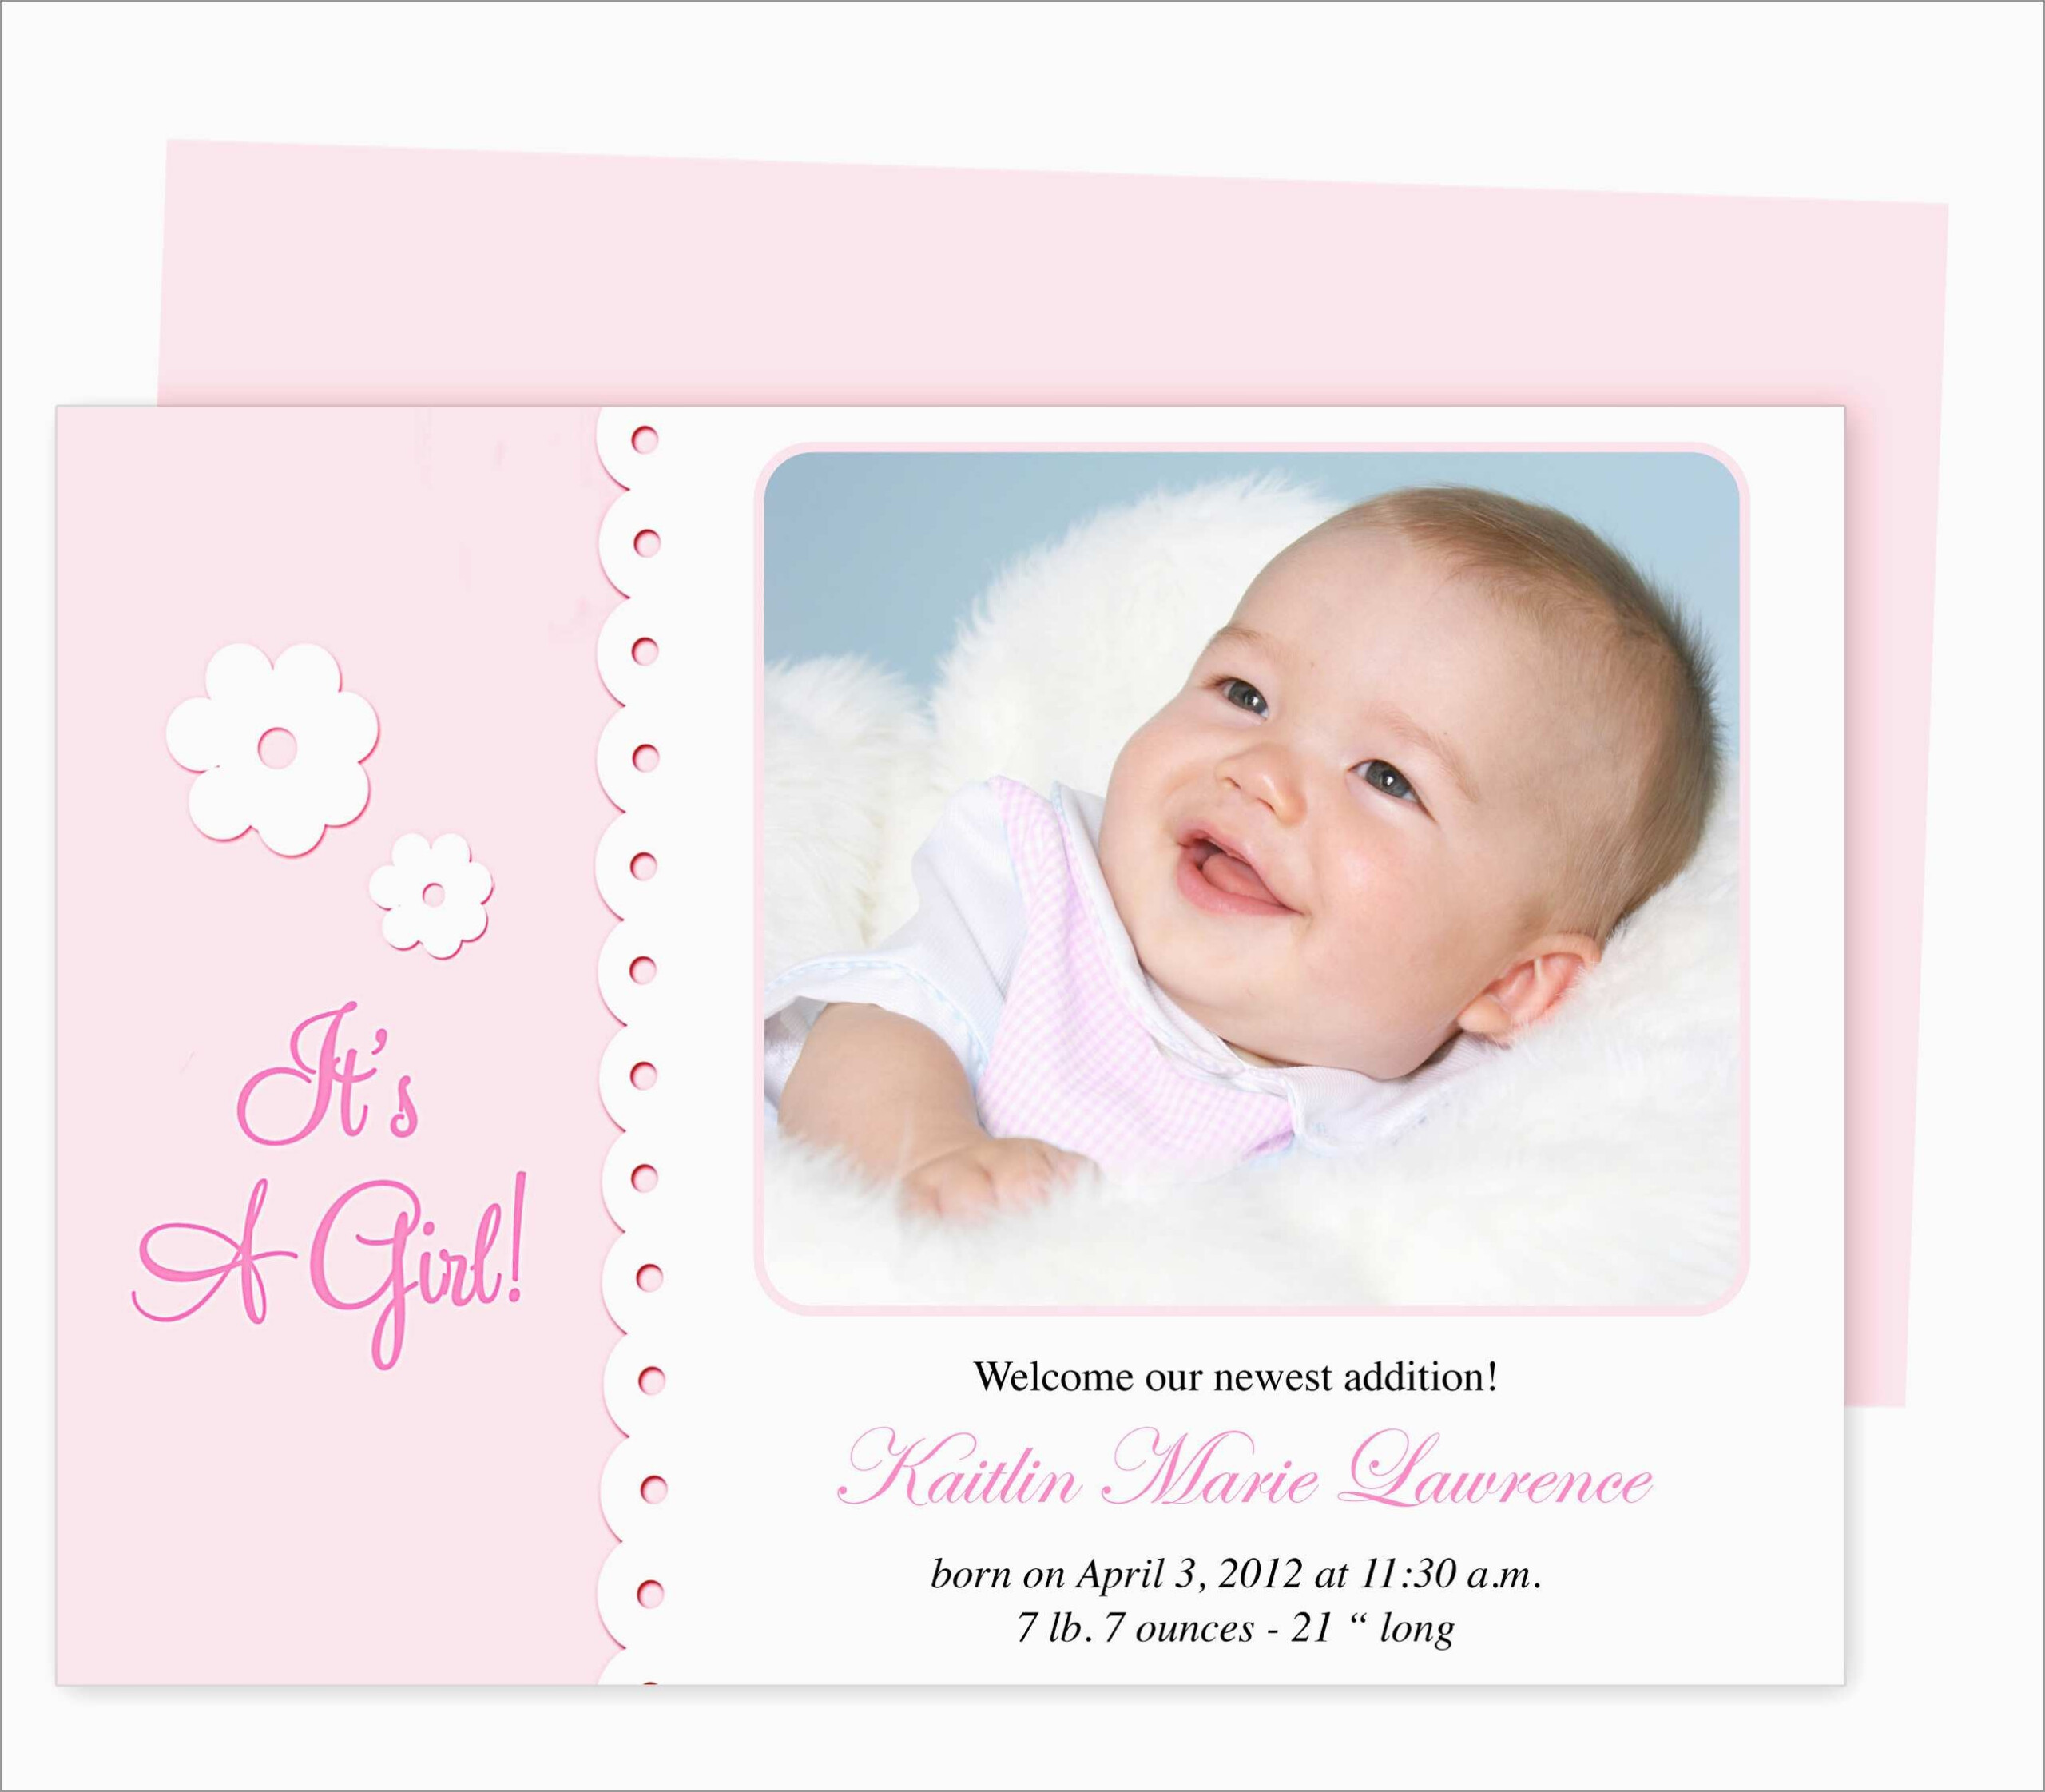 Free Printable Baby Birth Announcement Cards Free Printable